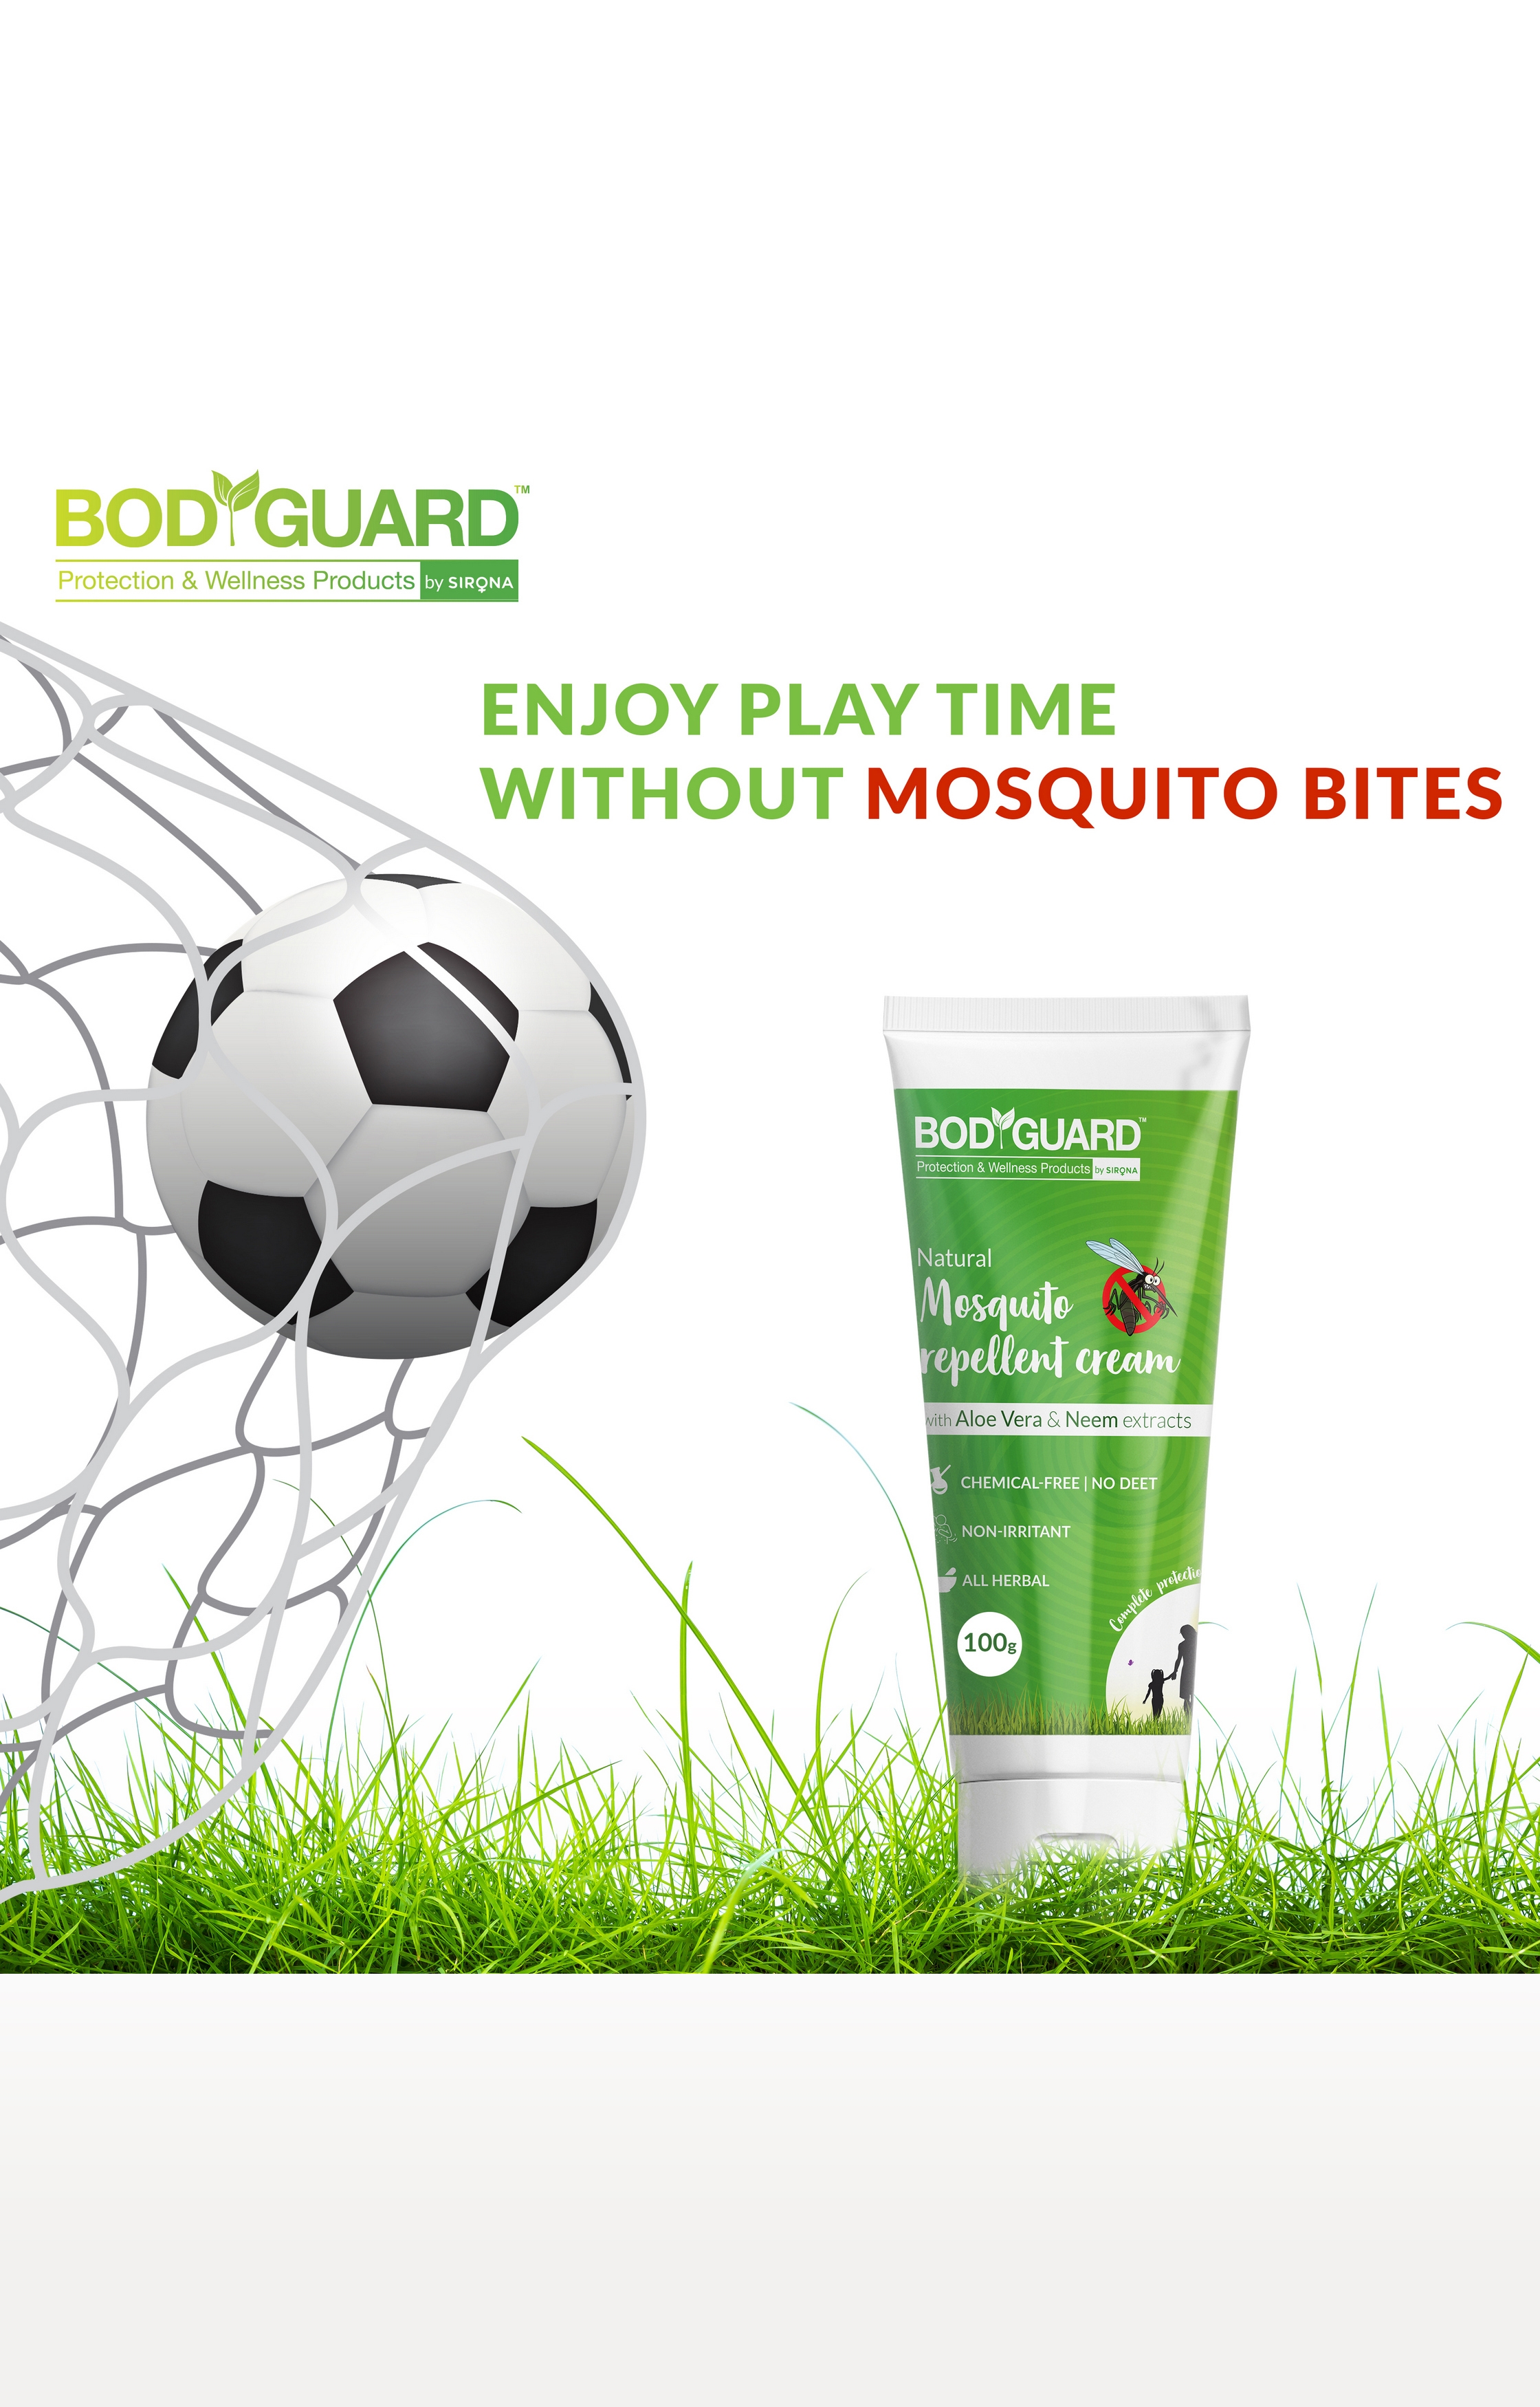 Bodyguard | Bodyguard Natural Mosquito Repellent Cream With Aloe Vera And Neem Extracts - 100 Gm 5